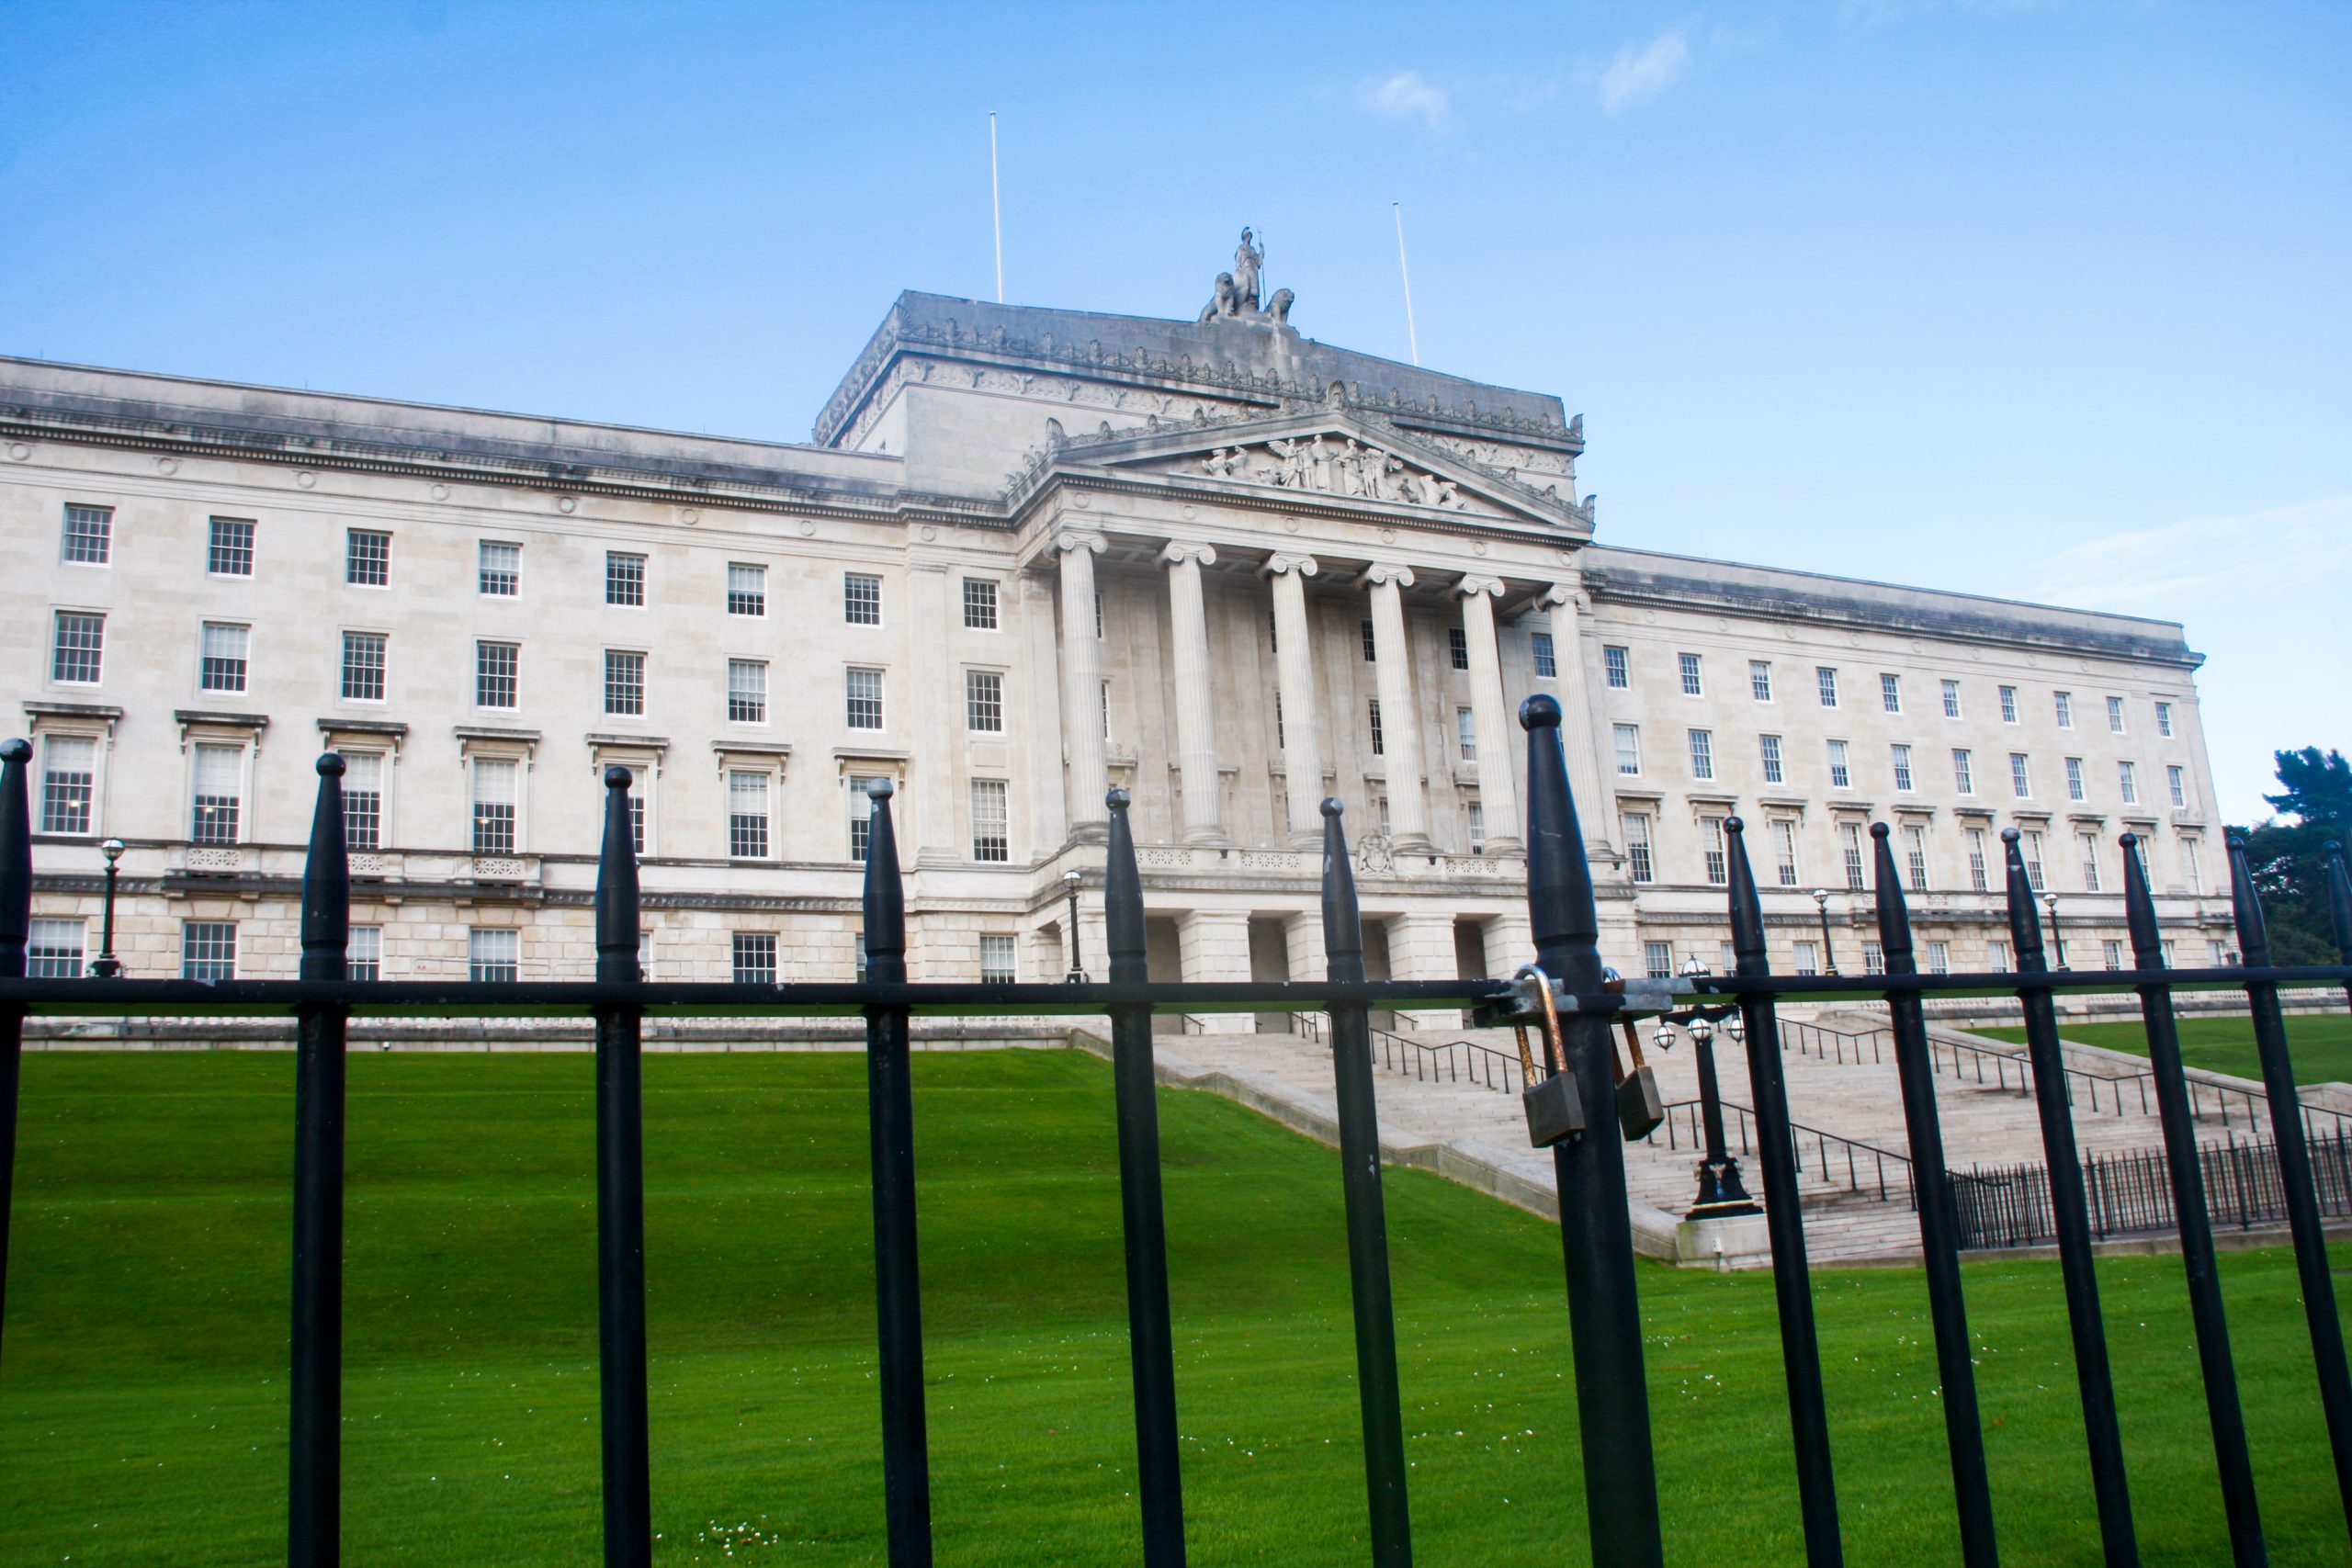 Northern Ireland omitted from Levelling Up funding due to “lack of working executive”